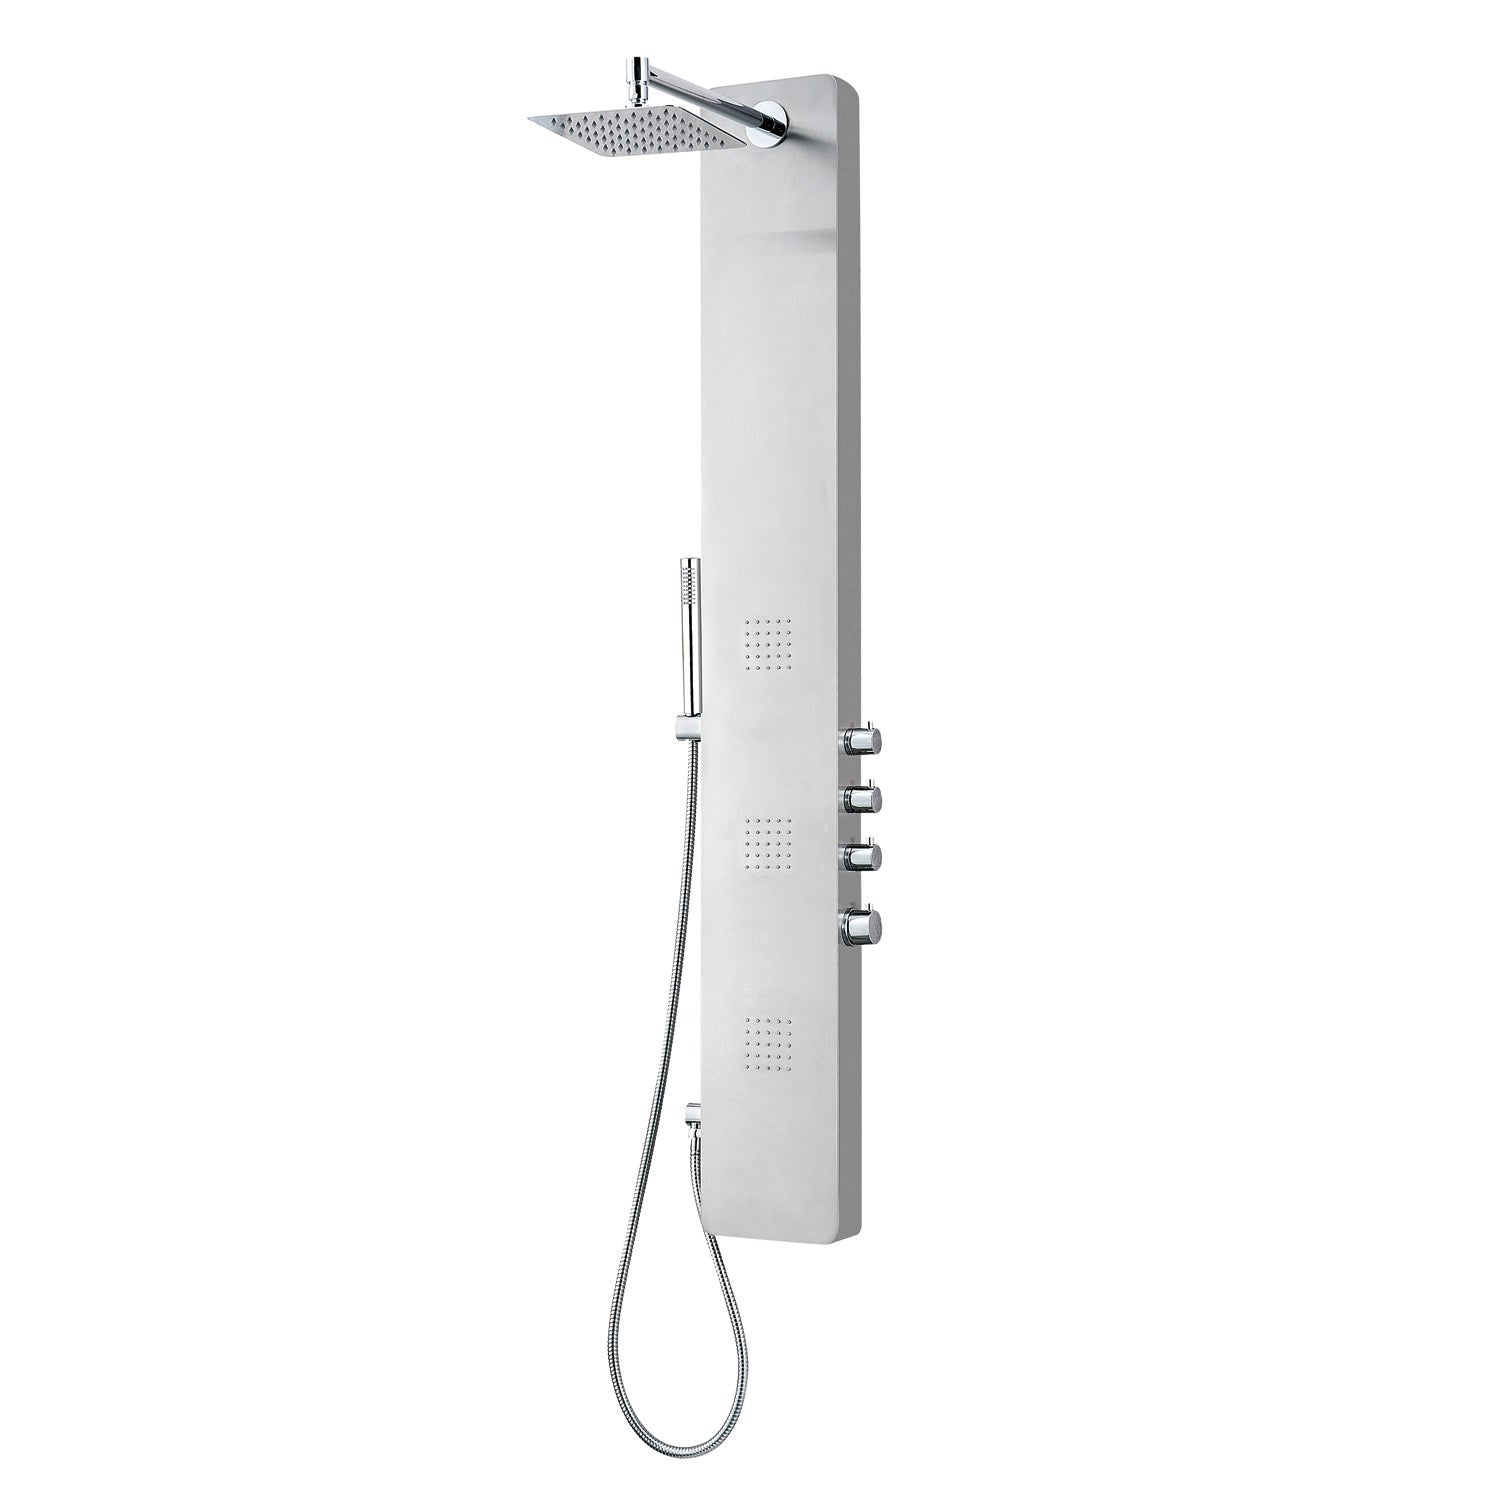 DAX Brushed Stainless Steel Shower Panel  Body Jets Hand Shower (DAX-136-1T)